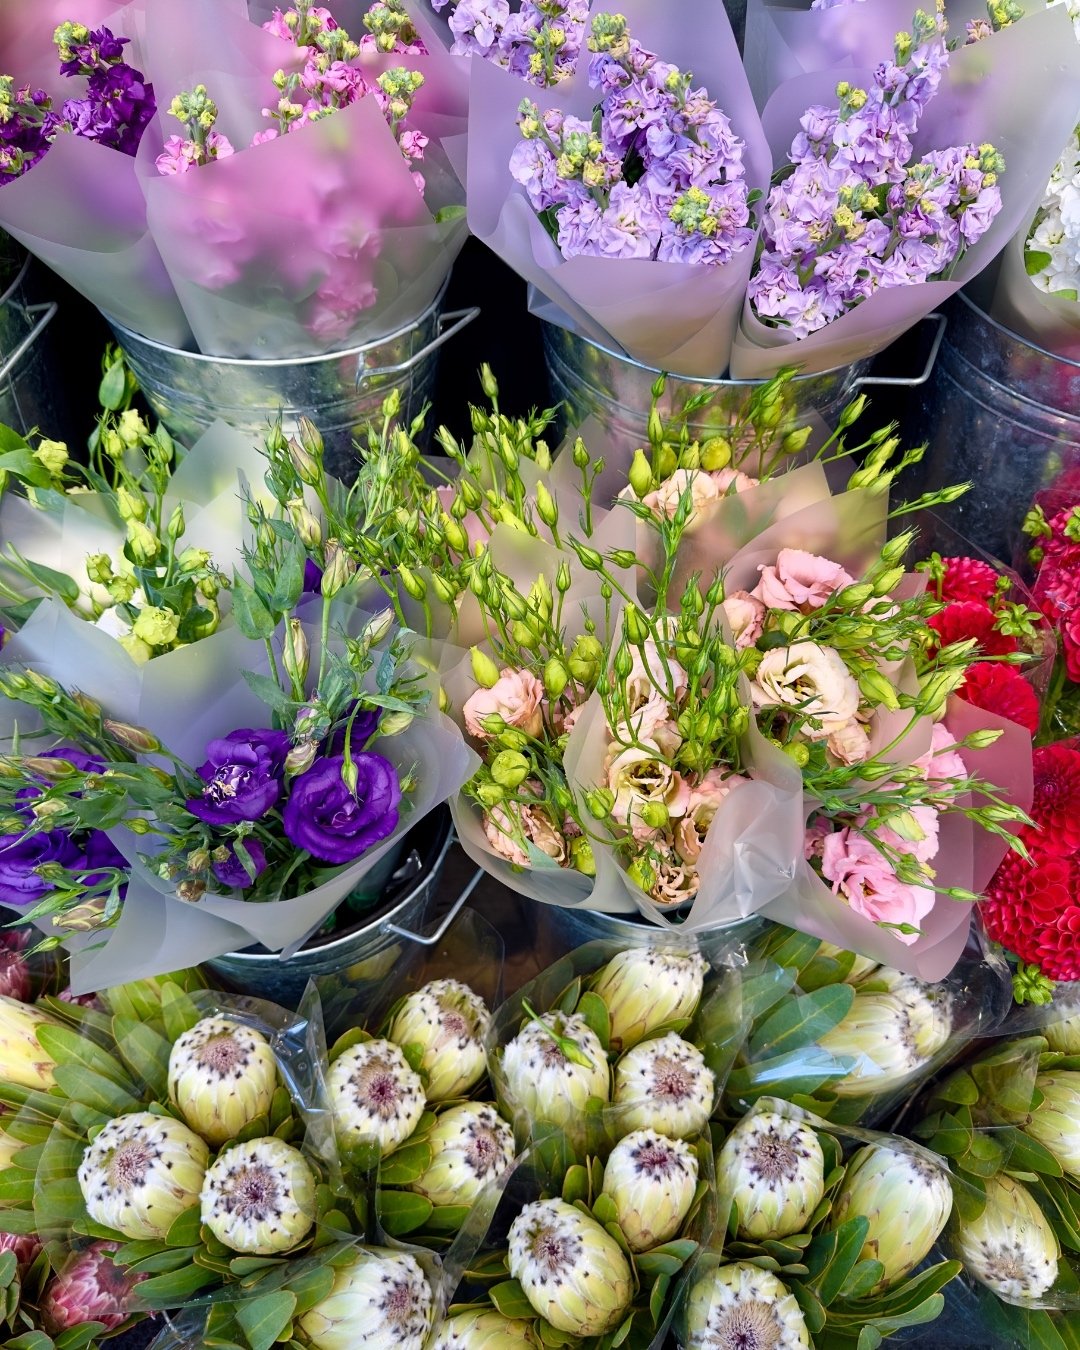 We have bucket loads of your favourites delivered fresh💐

These bunches need a new home to bloom in!

Drop into the Herdsman store or call us on 9387 3414 and one of our awesome florists will assist you!💫

.
.
#PerthHomeDecor #FloristPerth #WAFlora